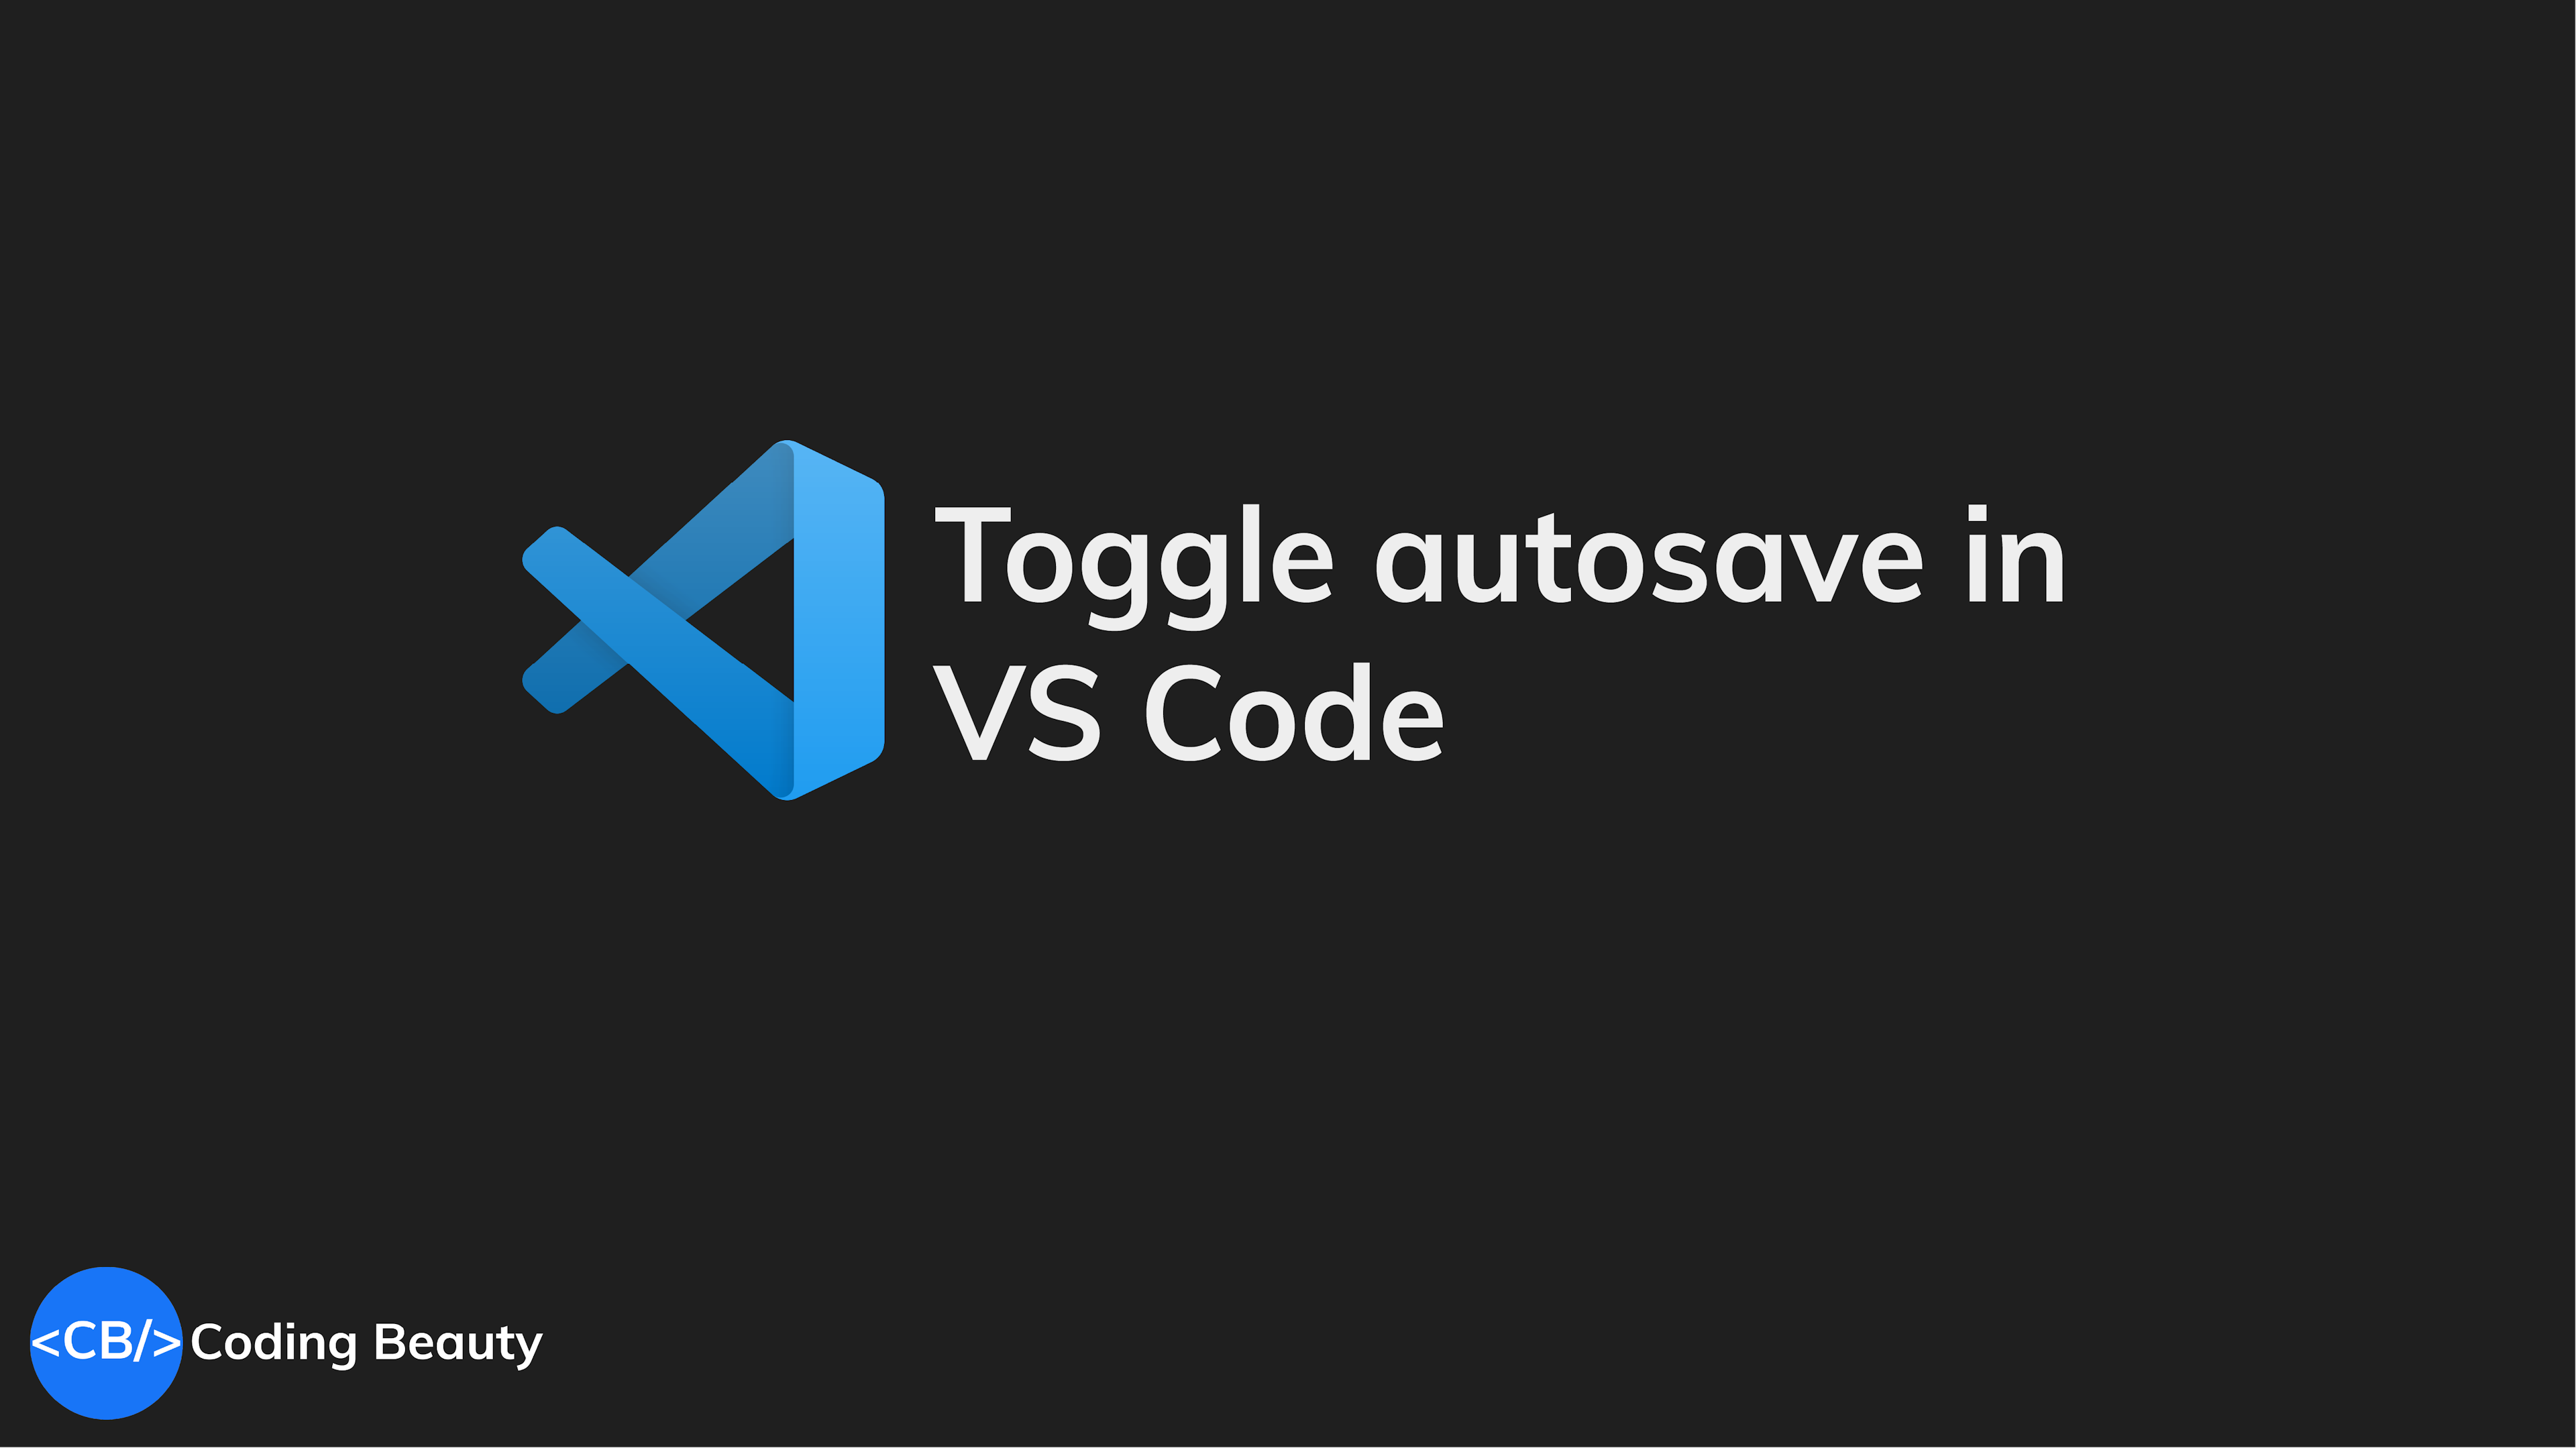 How to quickly toggle (enable/disable) autosave in VS Code